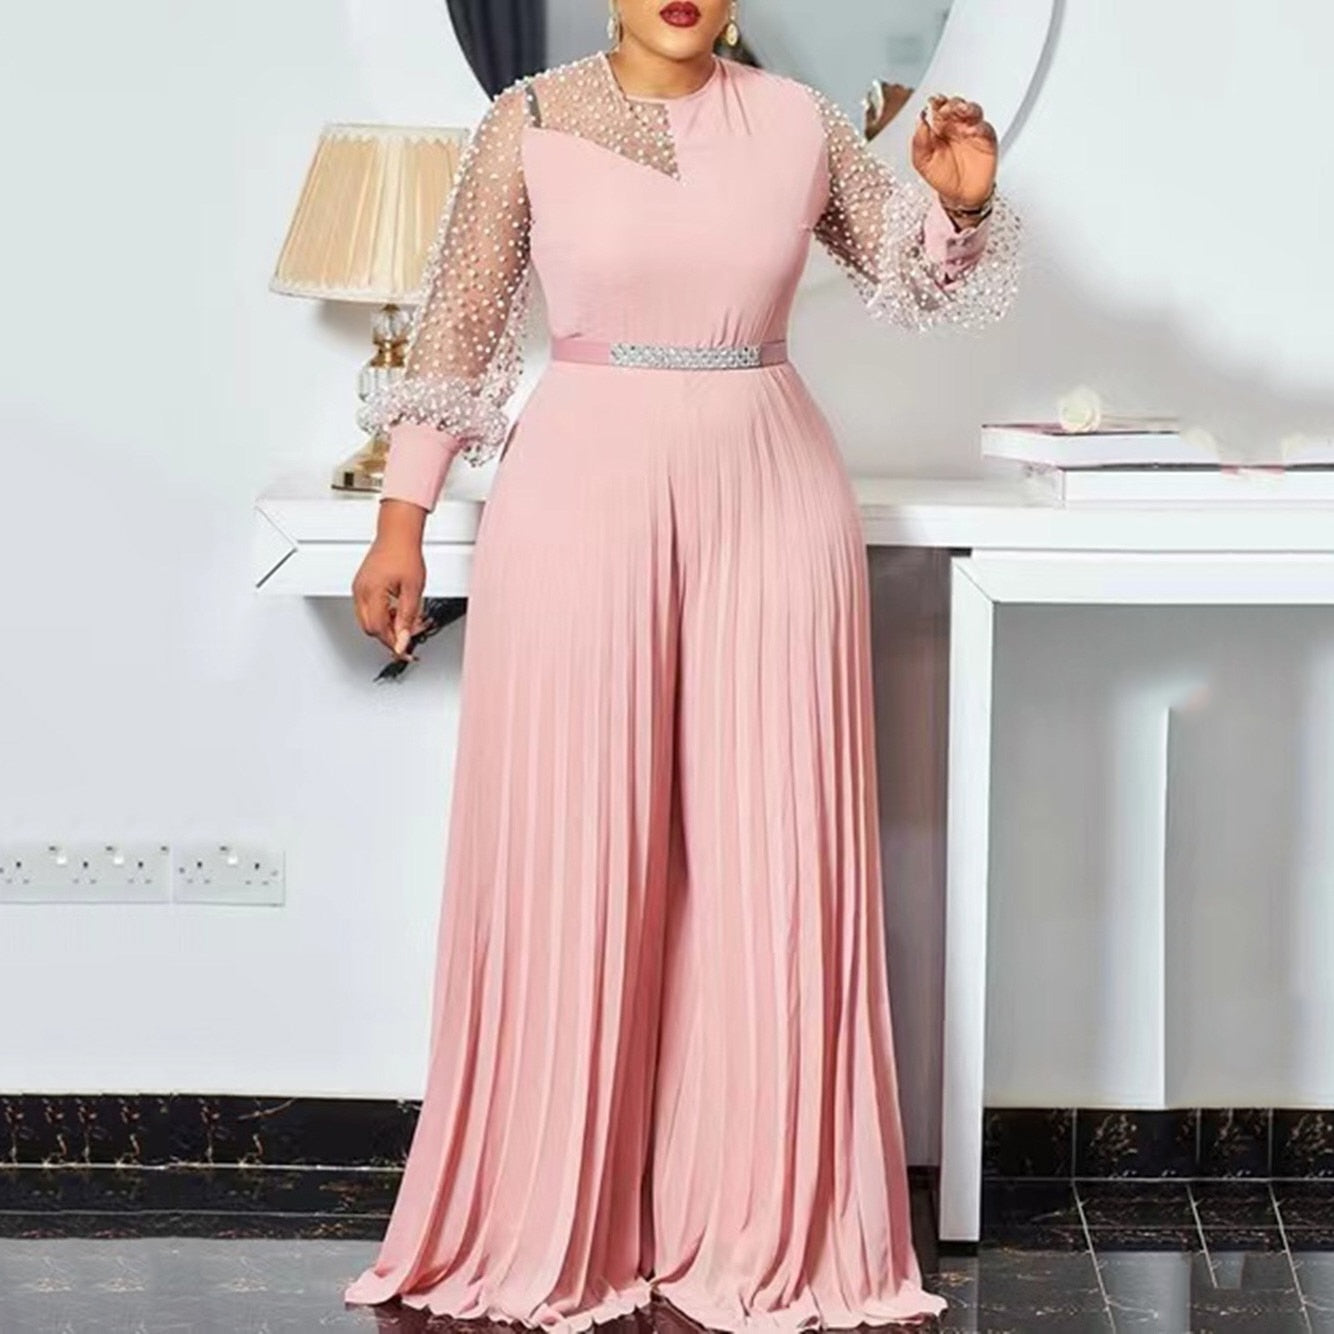 Aovica Oversized Jumpsuits and Rompers For Women Pink Pleated High Waisted Floor Length Elegant Evening Night Party Clothes Jumpsuits